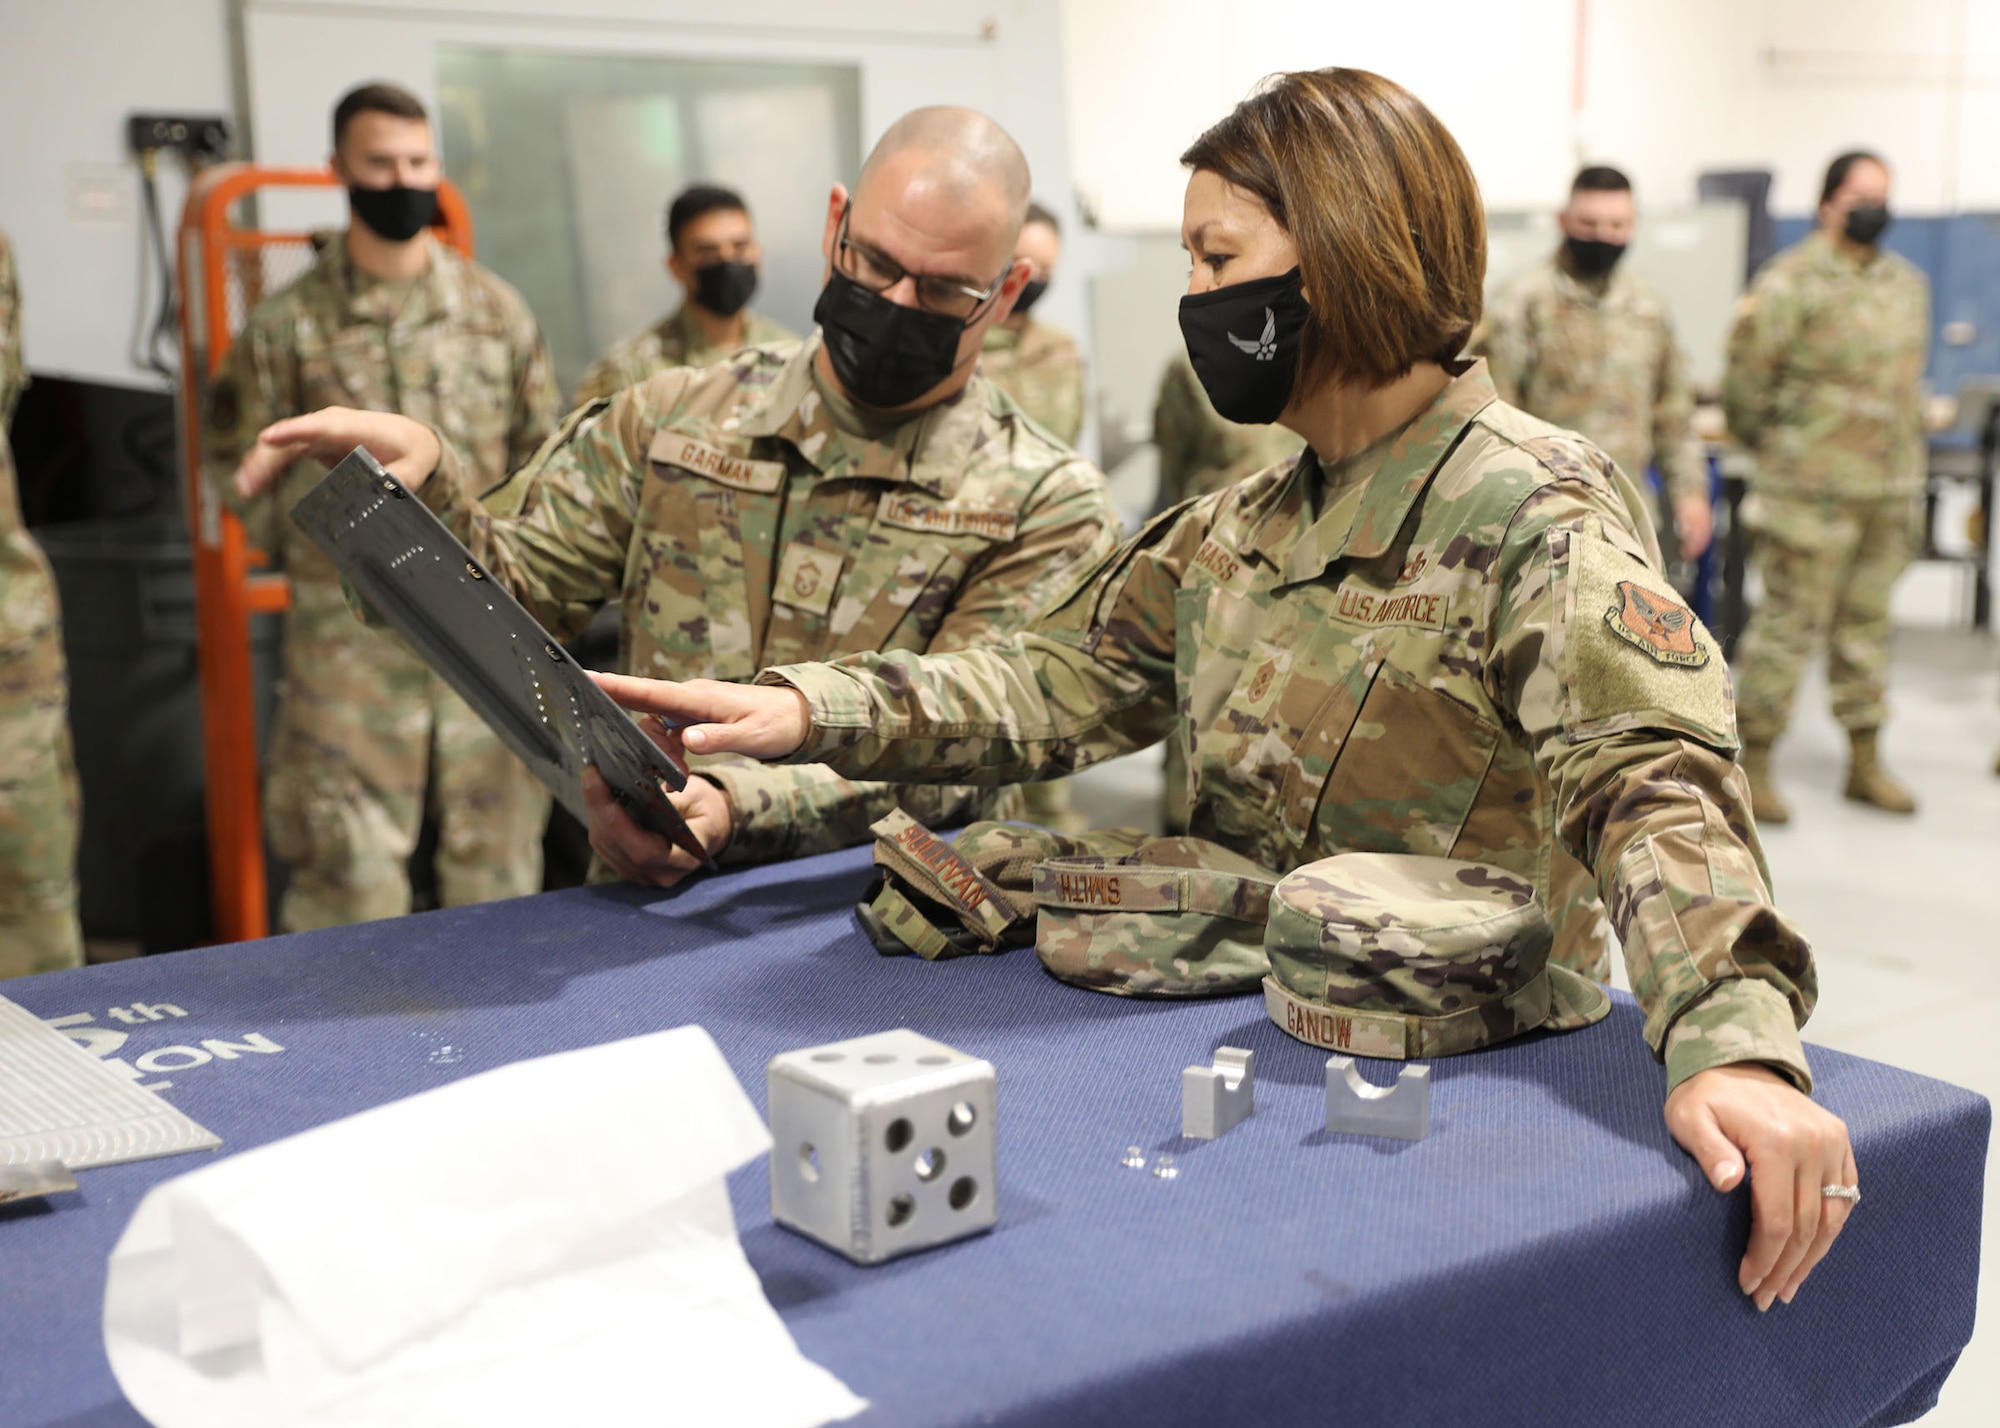 Senior Master Sgt. Nicholas Garman, 445th Maintenance Squadron fabrication flight superintendent, shows Chief Master Sgt. of the Air Force JoAnne S. Bass one of the fabricated parts his shop made during her visit to Wright-Patterson Air Force Base, Ohio, Oct. 2, 2021.